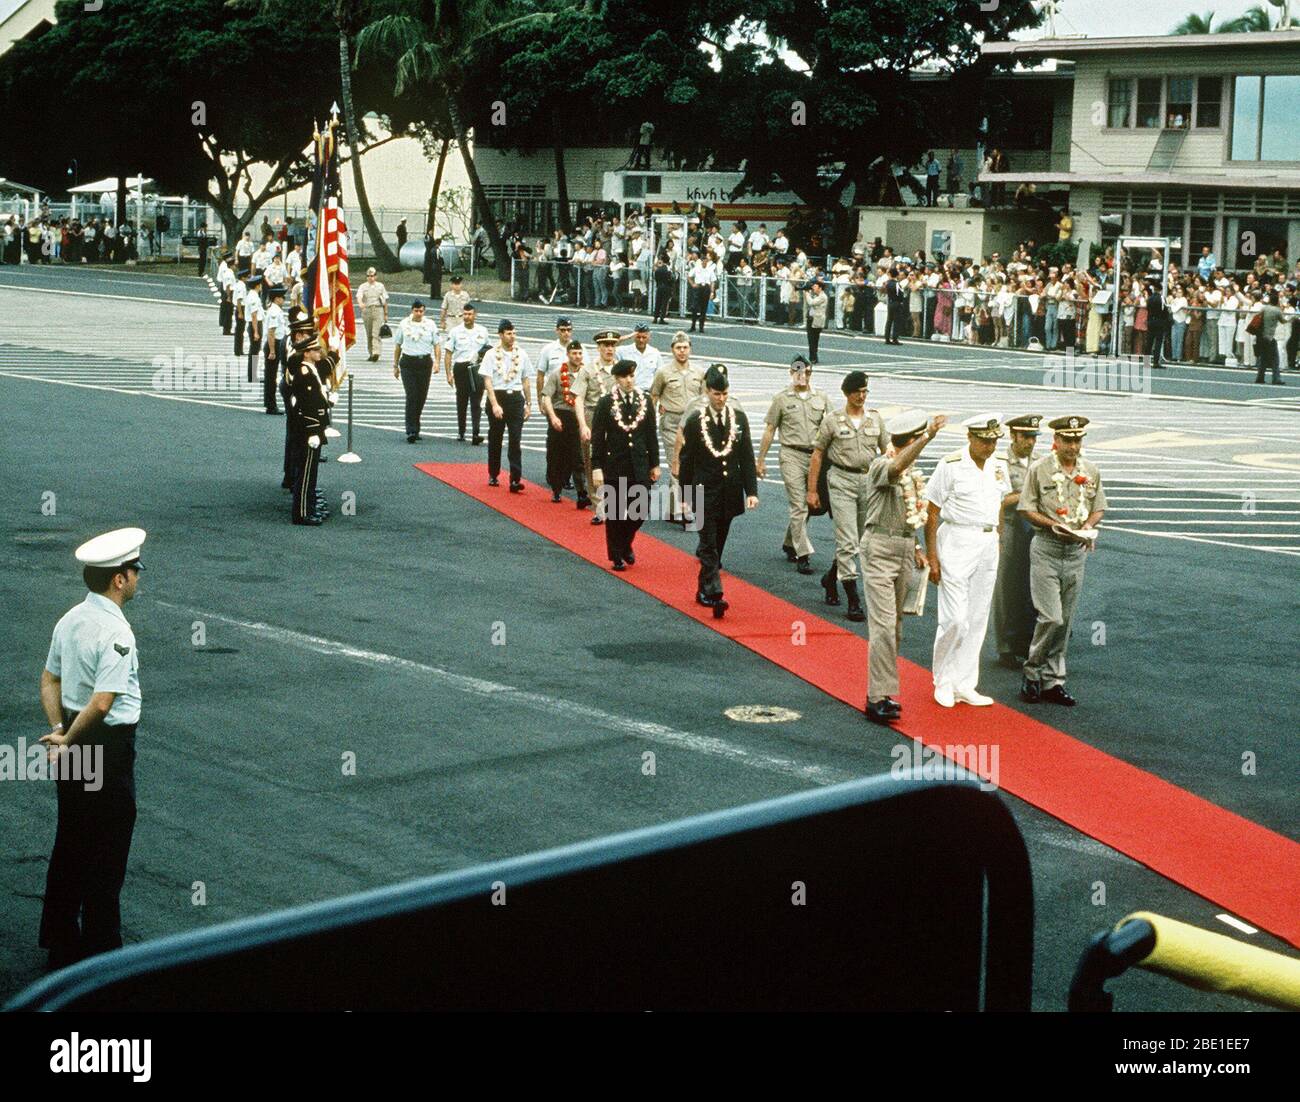 After a brief refueling stop, the first group of Prisoners of War released in Hanoi by North Vietnam walk on the red carpet toward their waiting aircraft.  They are lead by Pacific Command's officials and POW, U.S. Navy CPT Jeremiah Andrew Denton, (Captured 18 Jul65).  The POWs were enroute from Clark Air Base, Philippines to Travis Air Force Base, CA and then to be reunited with their families in the states. Stock Photo